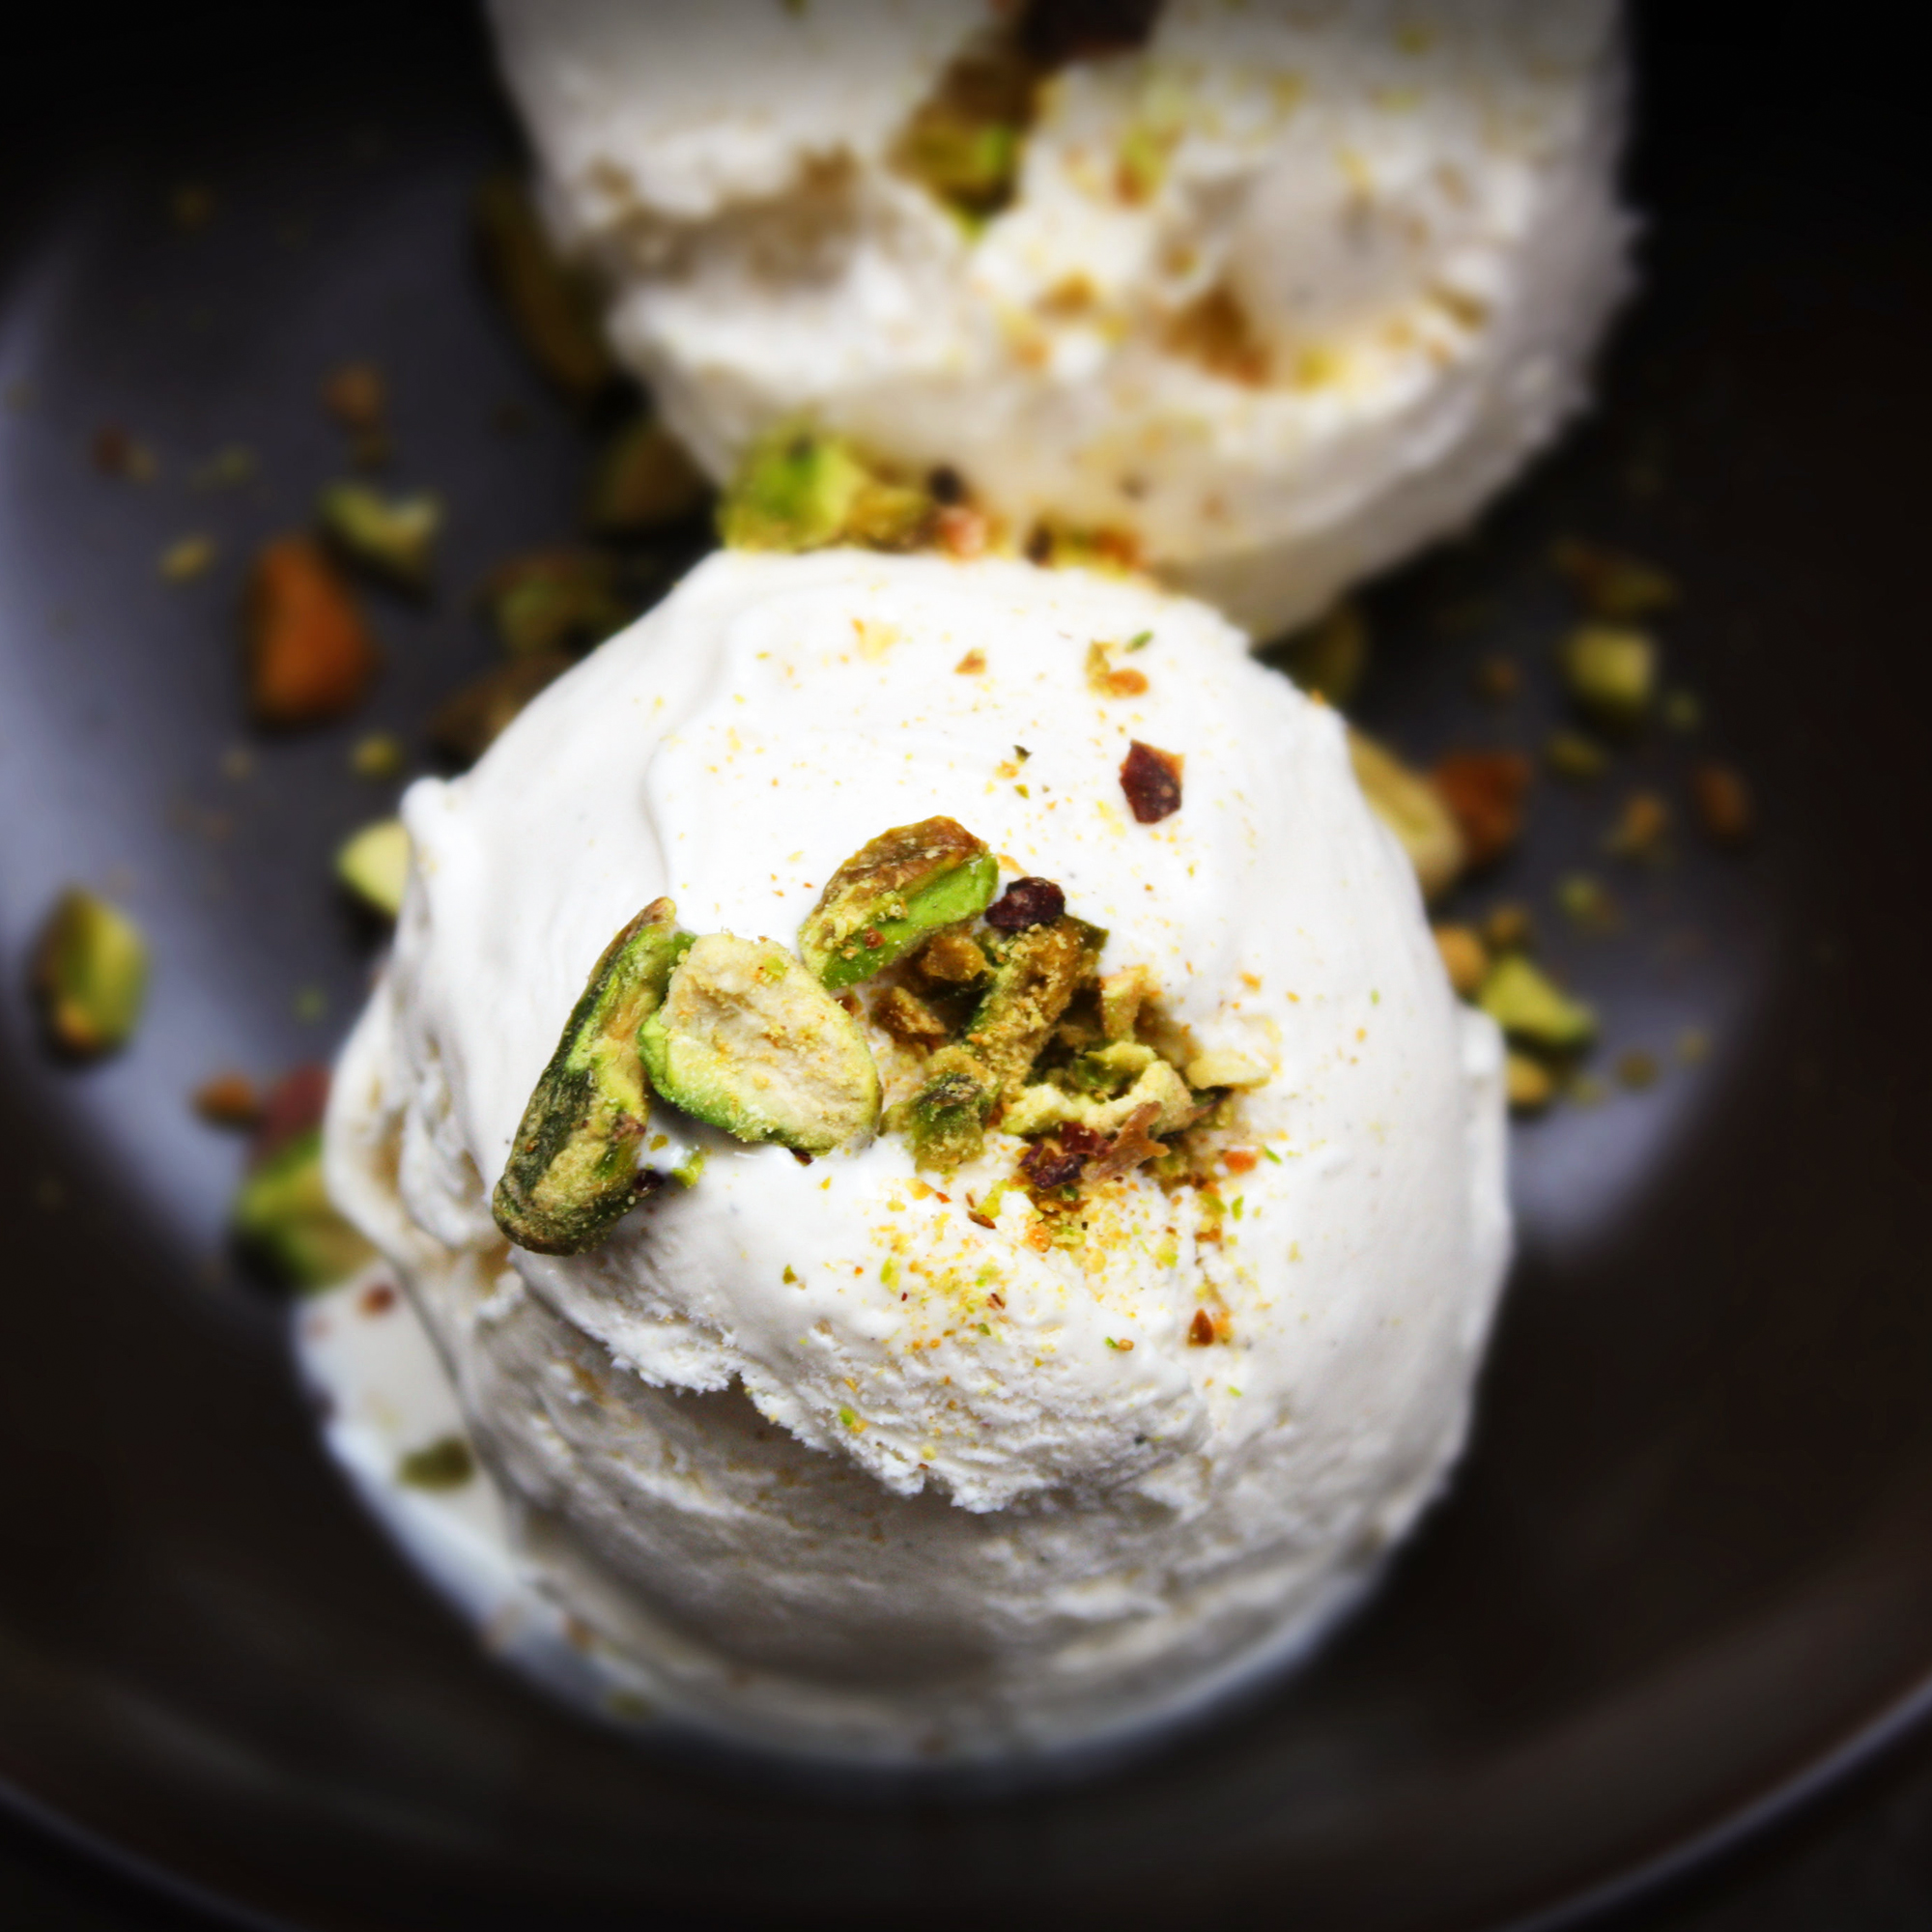 close up view of two scoops of Kulfi ice cream garnished with cardamom in a black bowl